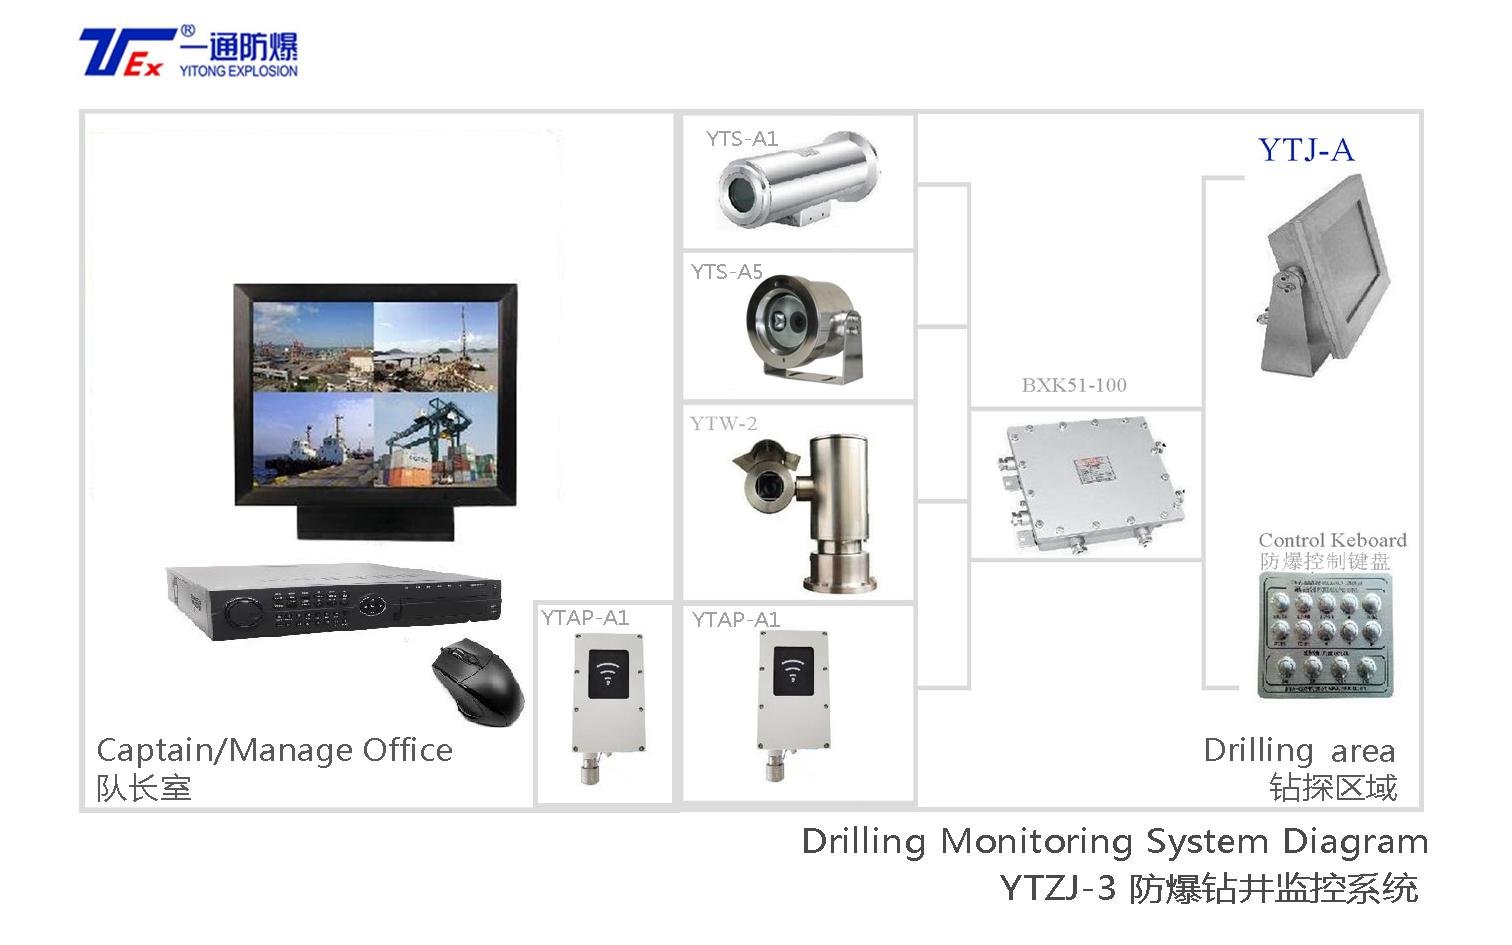 ATEX YTZJ-3 Explosion-proof Monitoring System Explosion-proof CCTV System